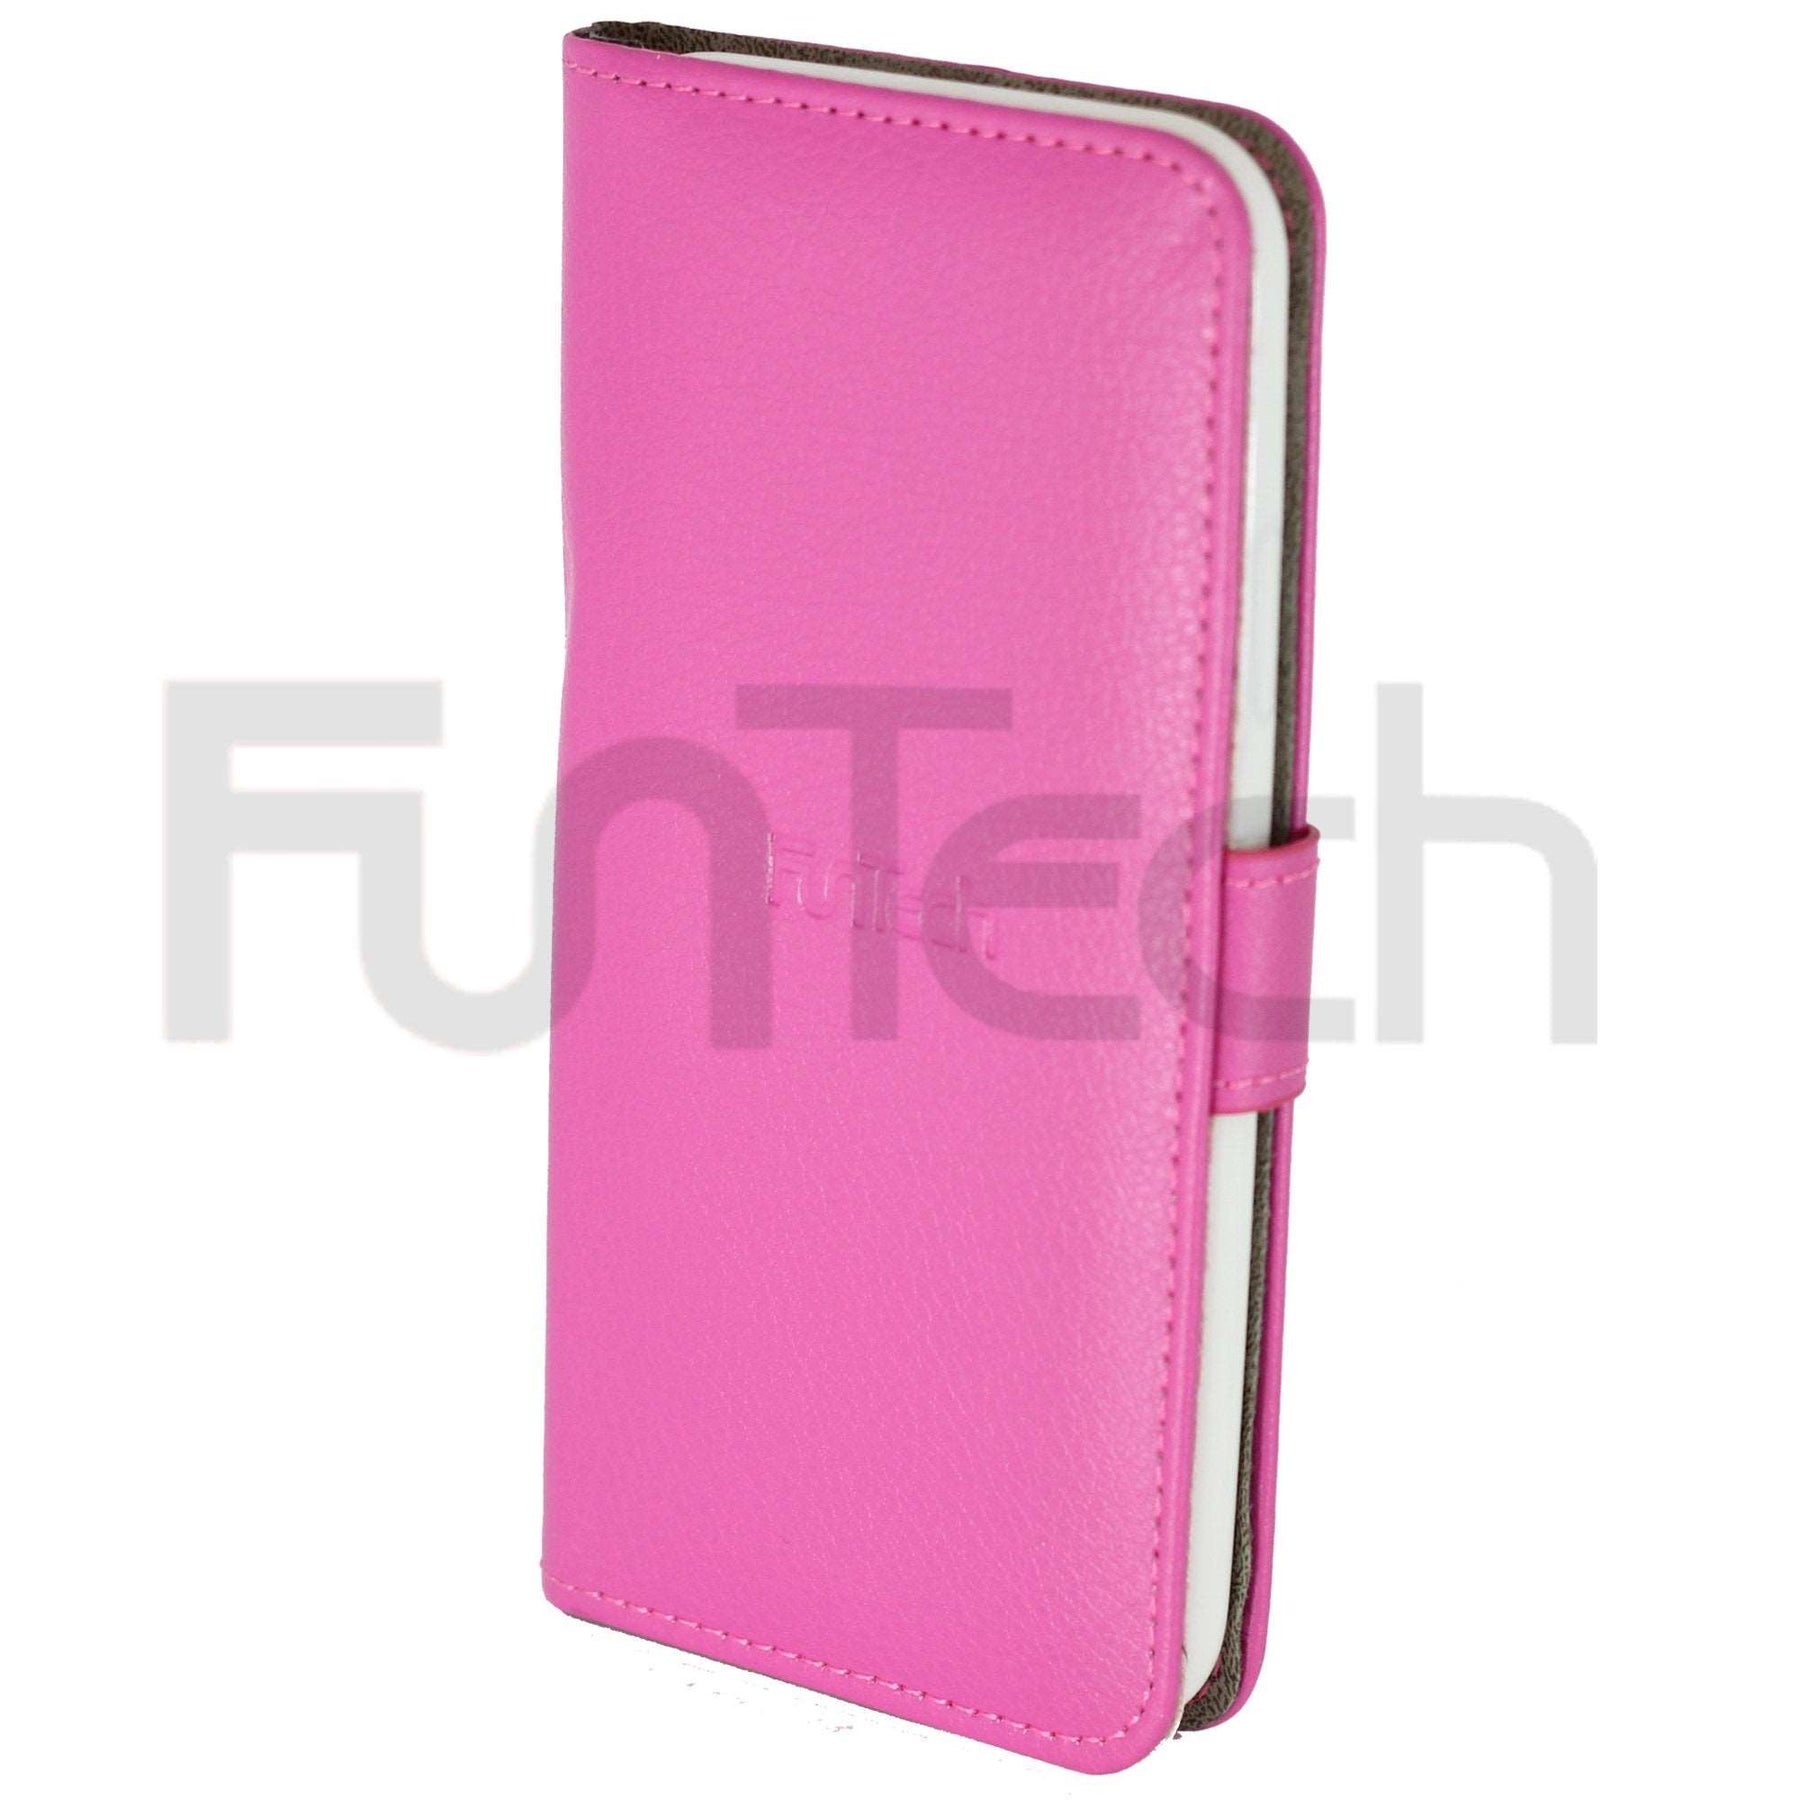 Apple iPhone X Leather Case Pink